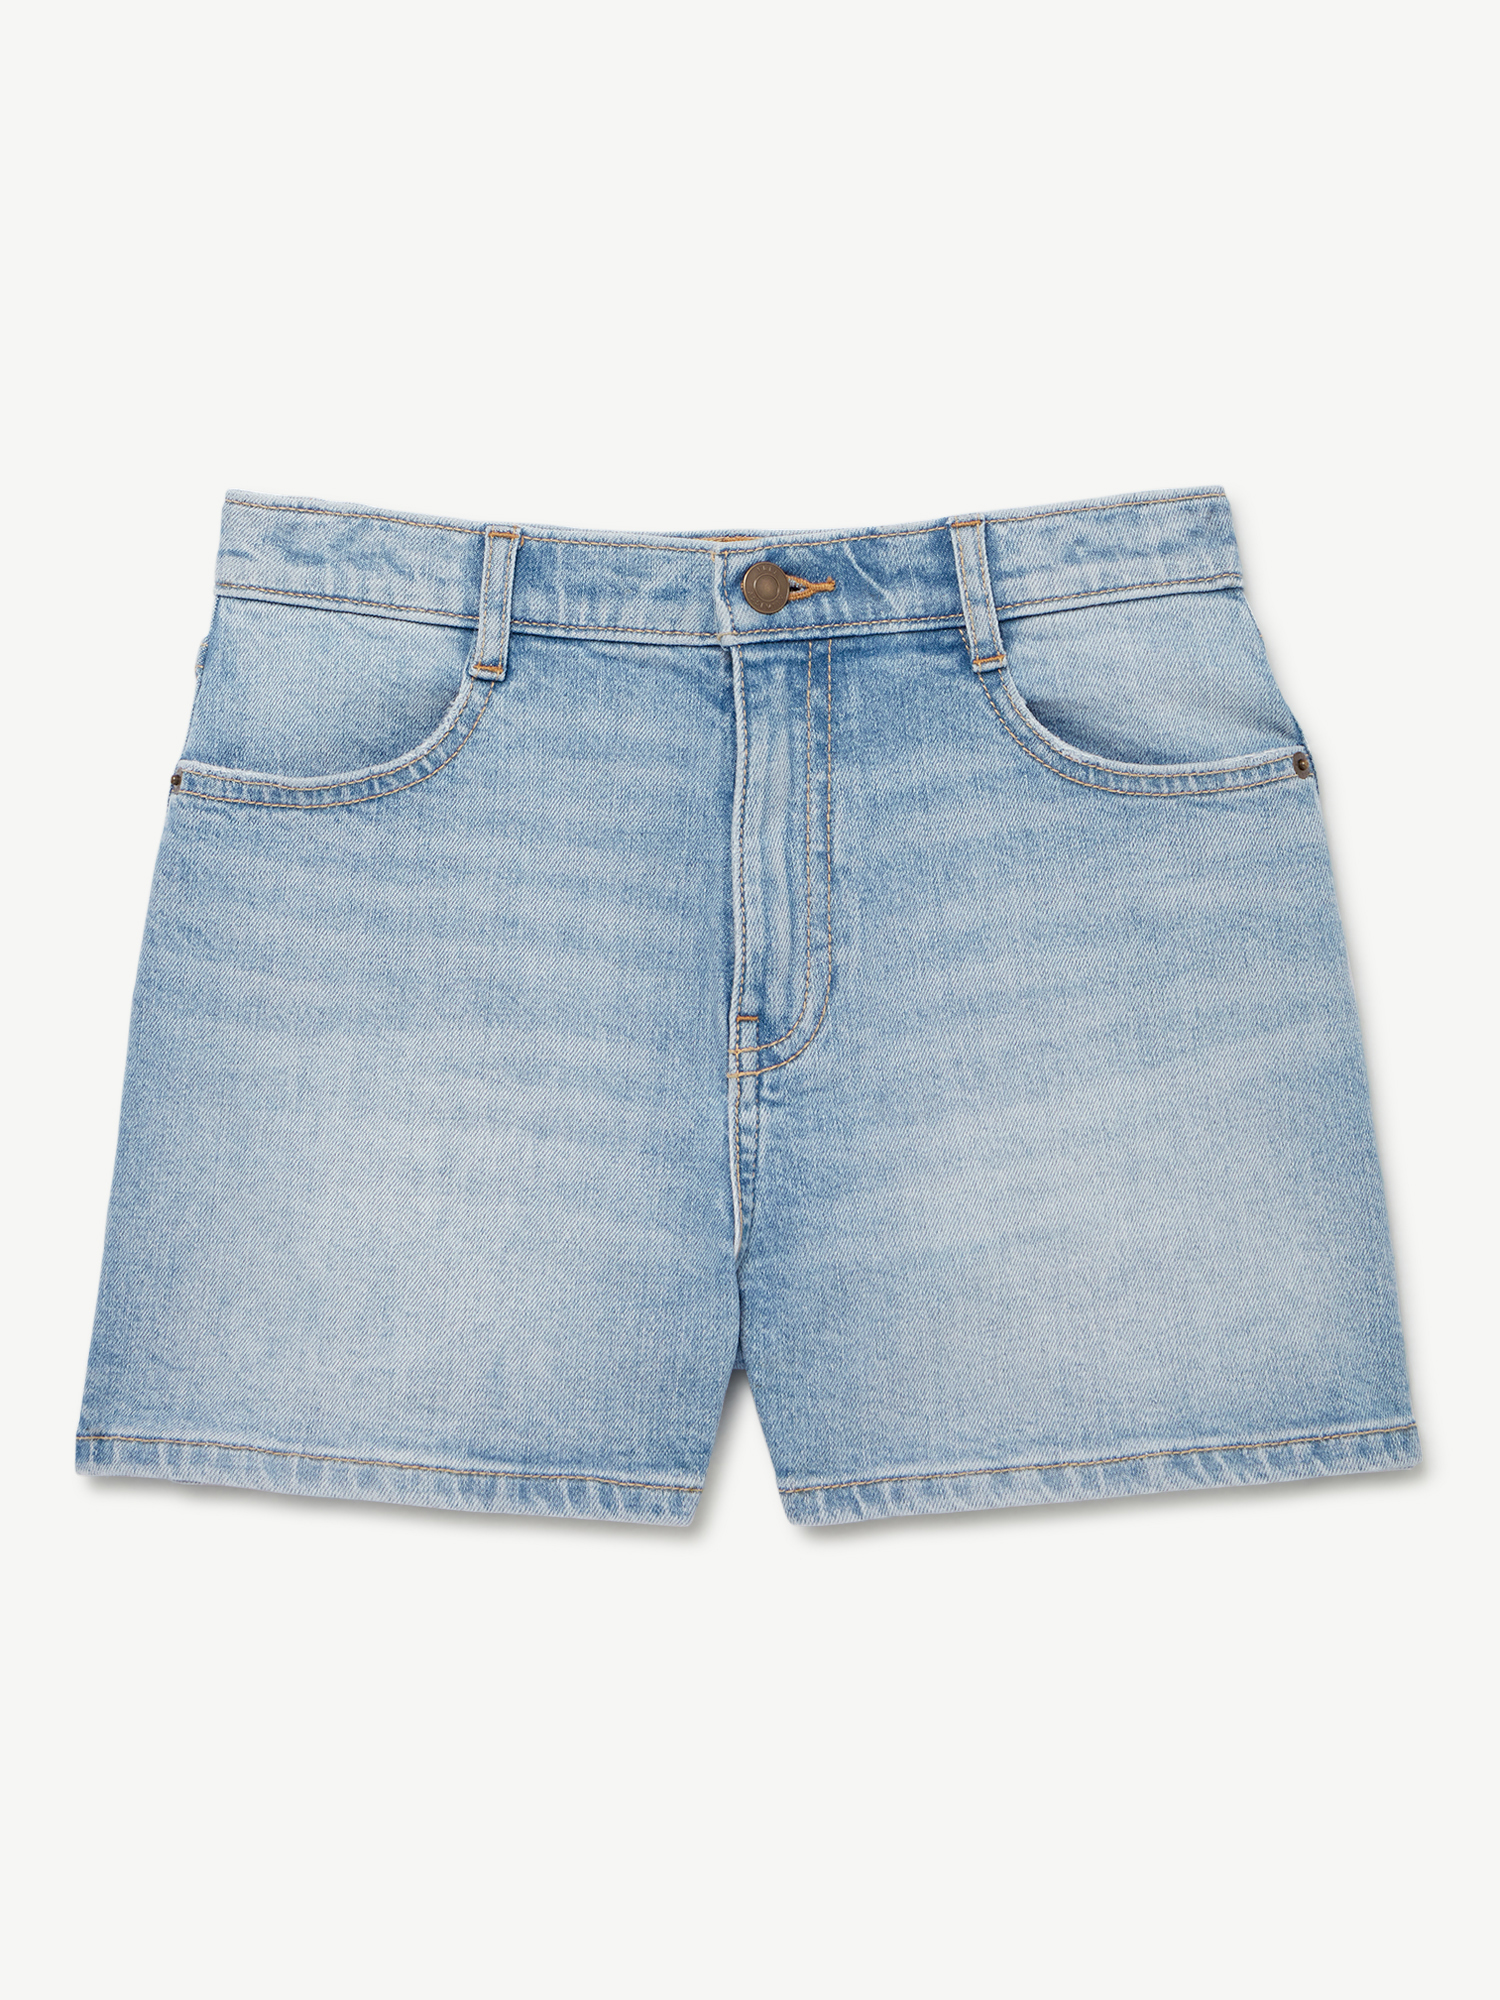 Free Assembly Girls Vintage-Inspired High Rise Shorts, Sizes 4-18 - image 4 of 5